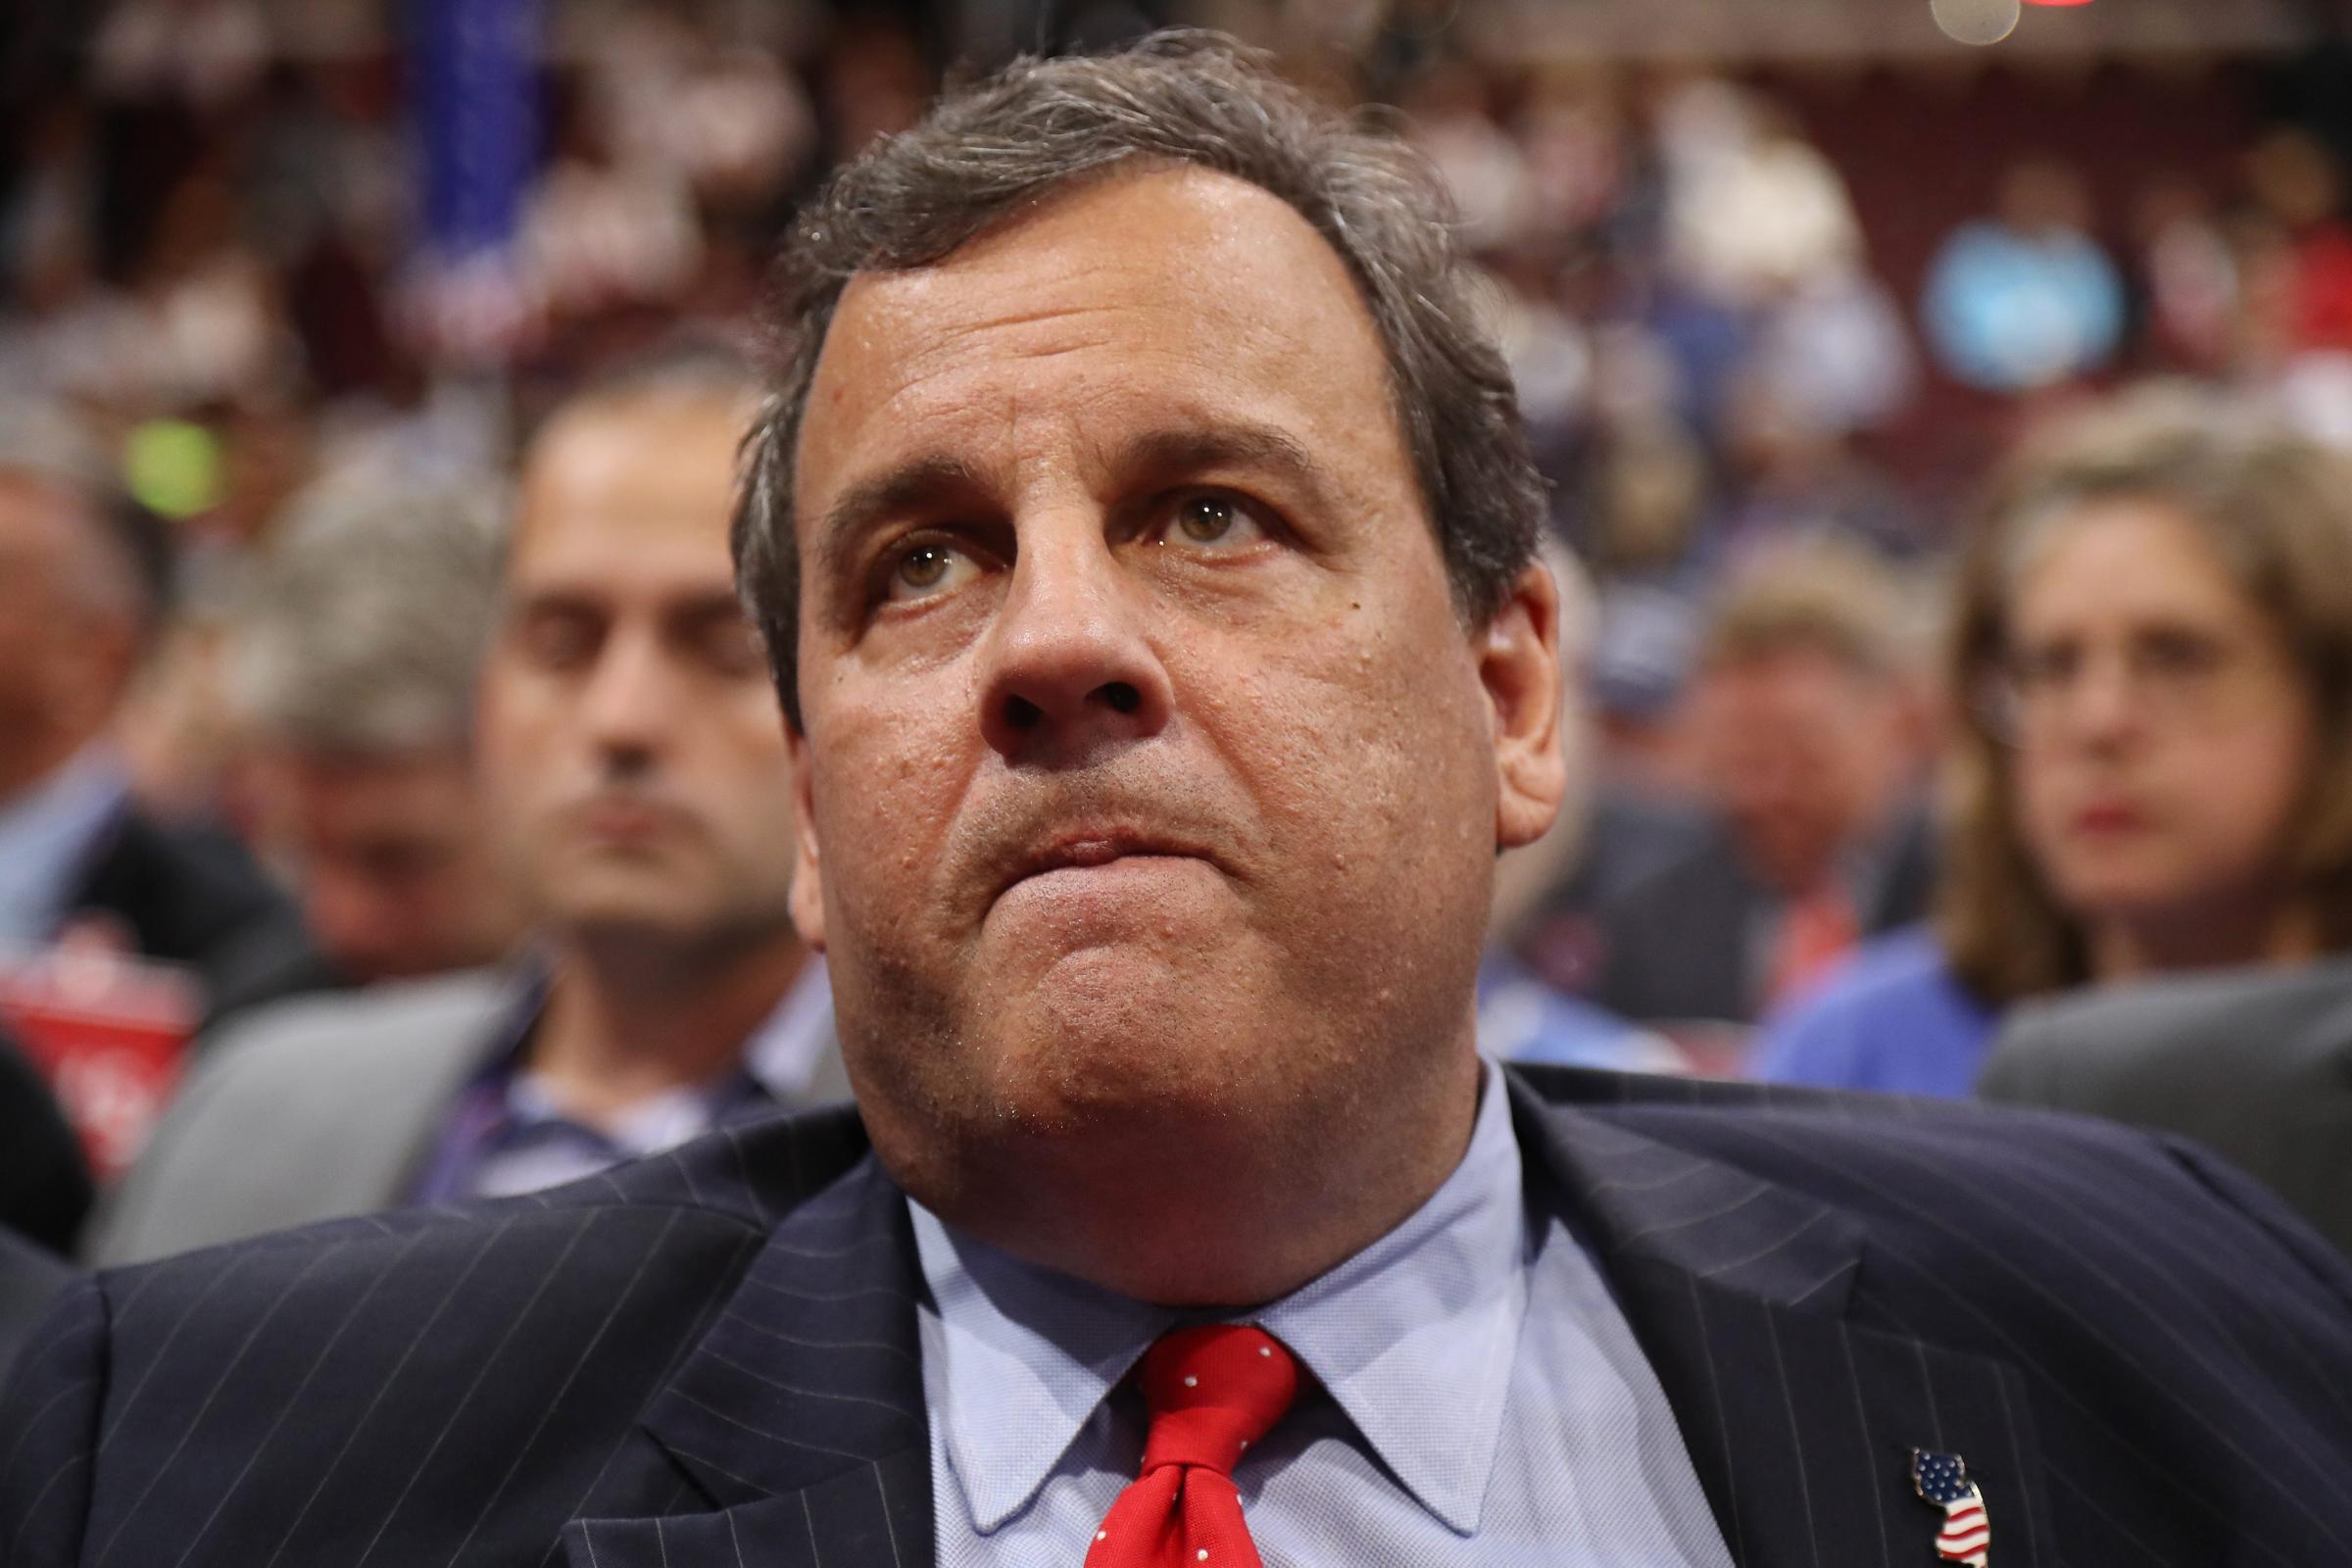 New Jersey Governor Chris Christie listens during the second session on the first day of the 2016 Republican National Convention at Quicken Loans Arena in Cleveland, July 18, 2016.